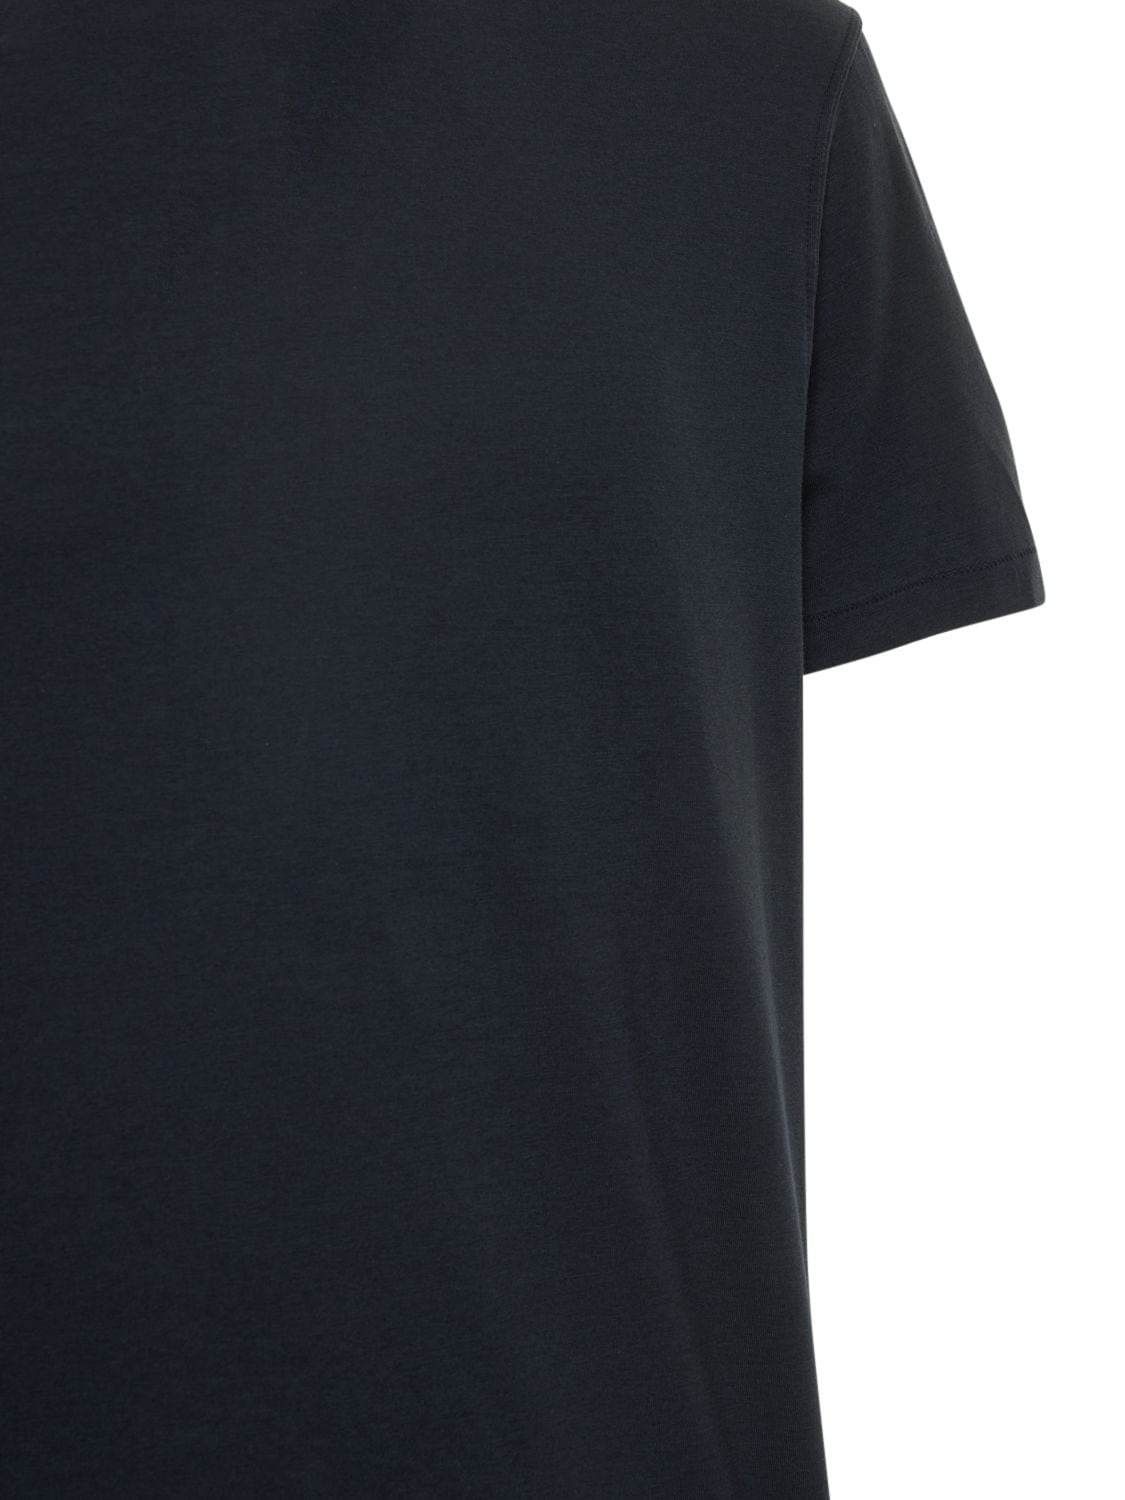 Shop Tom Ford Lyocell & Cotton S/s Crewneck T-shirt In Navy